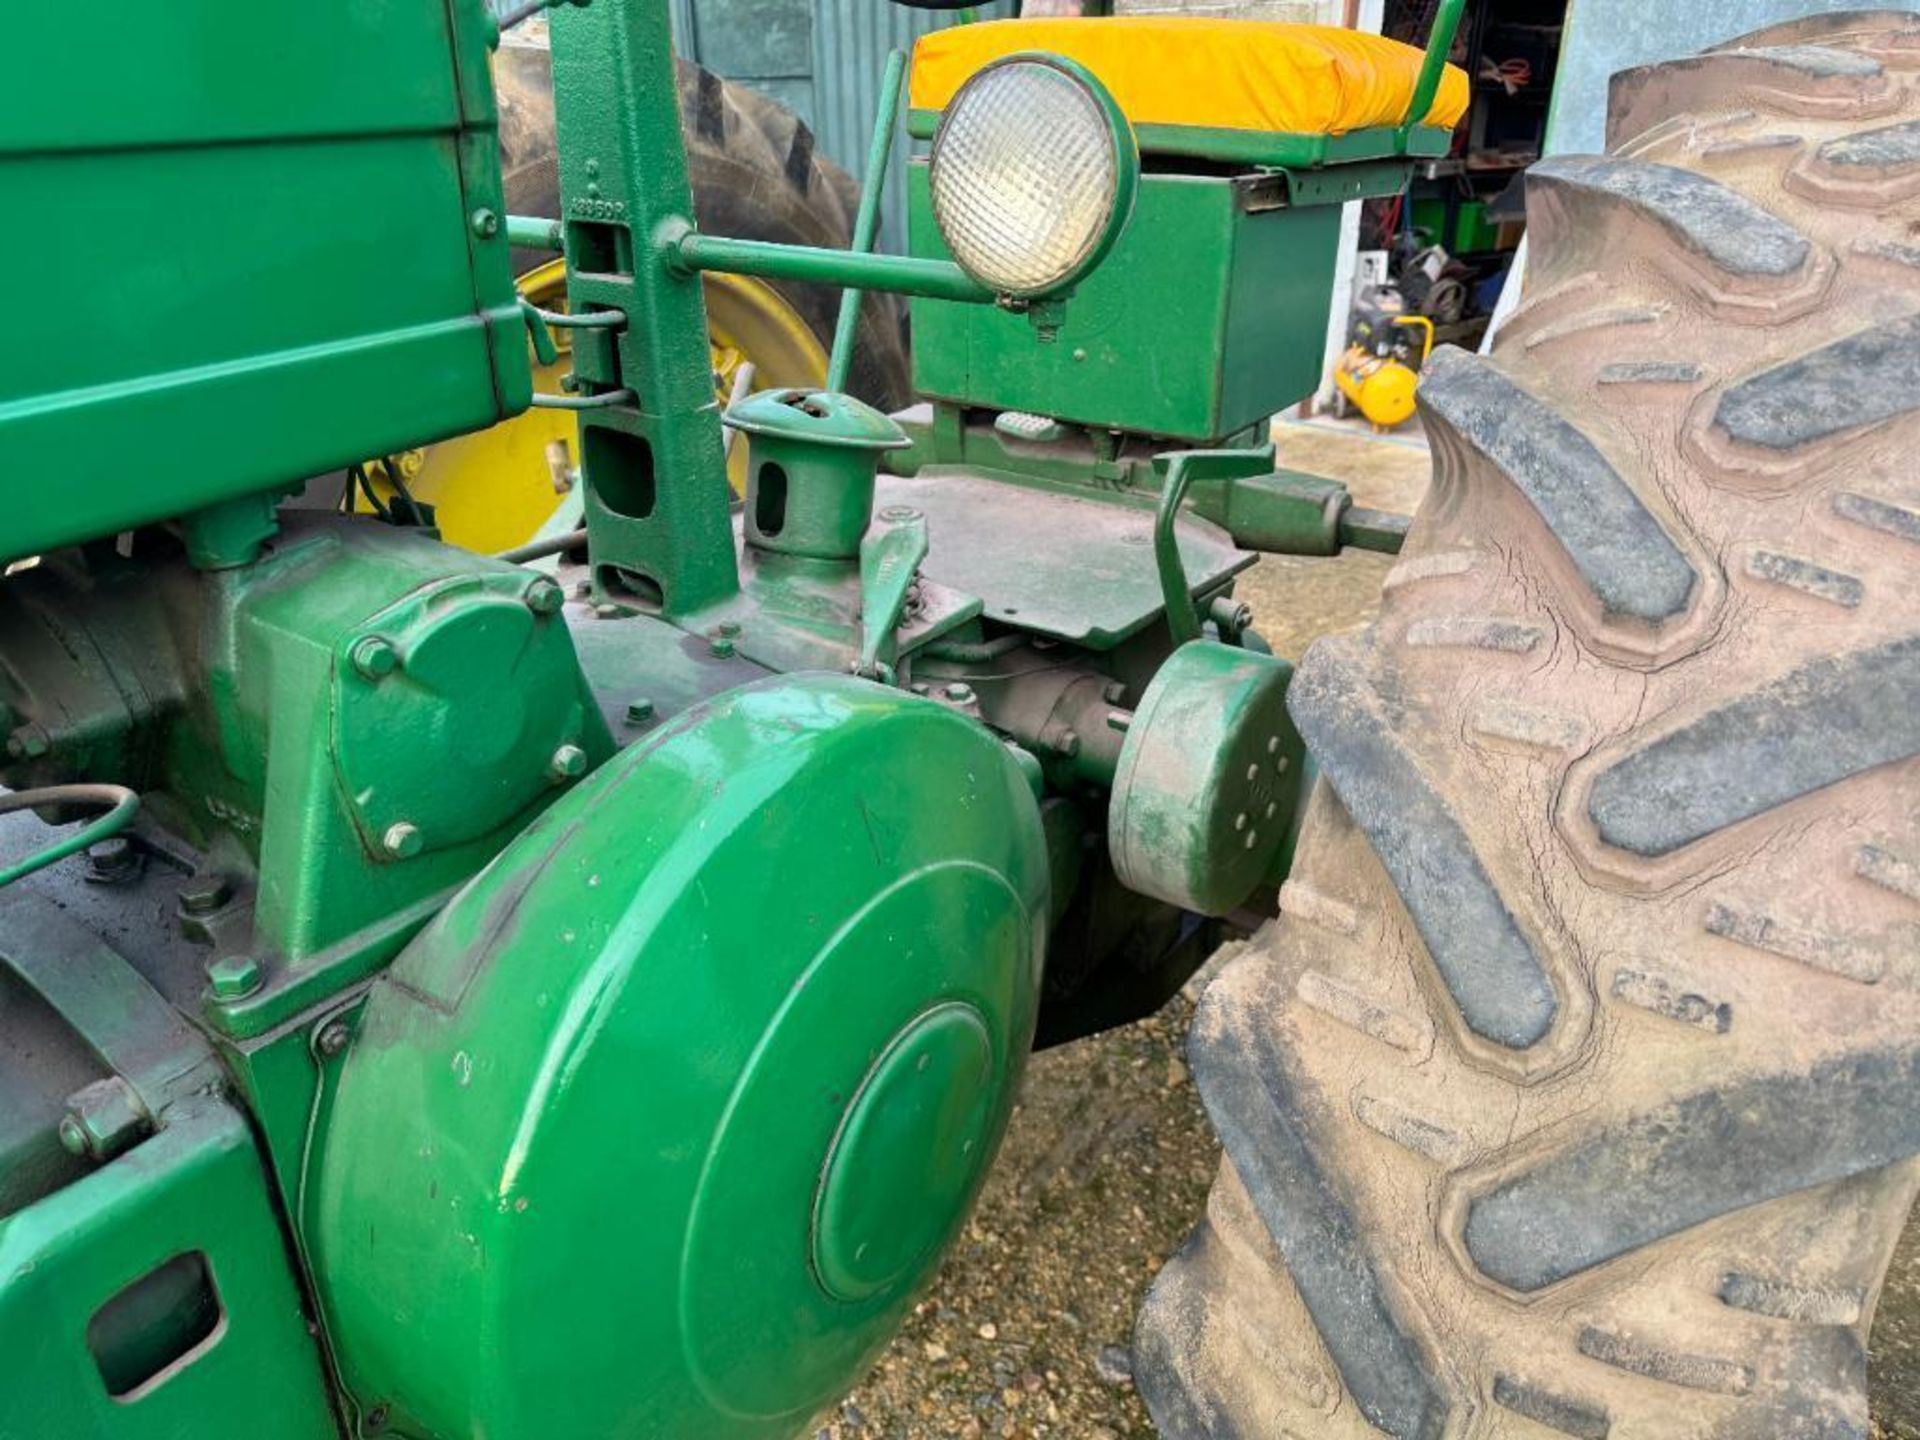 1948 John Deere Model A row crop tractor with side belt pulley, rear PTO and drawbar and twin front - Image 11 of 15